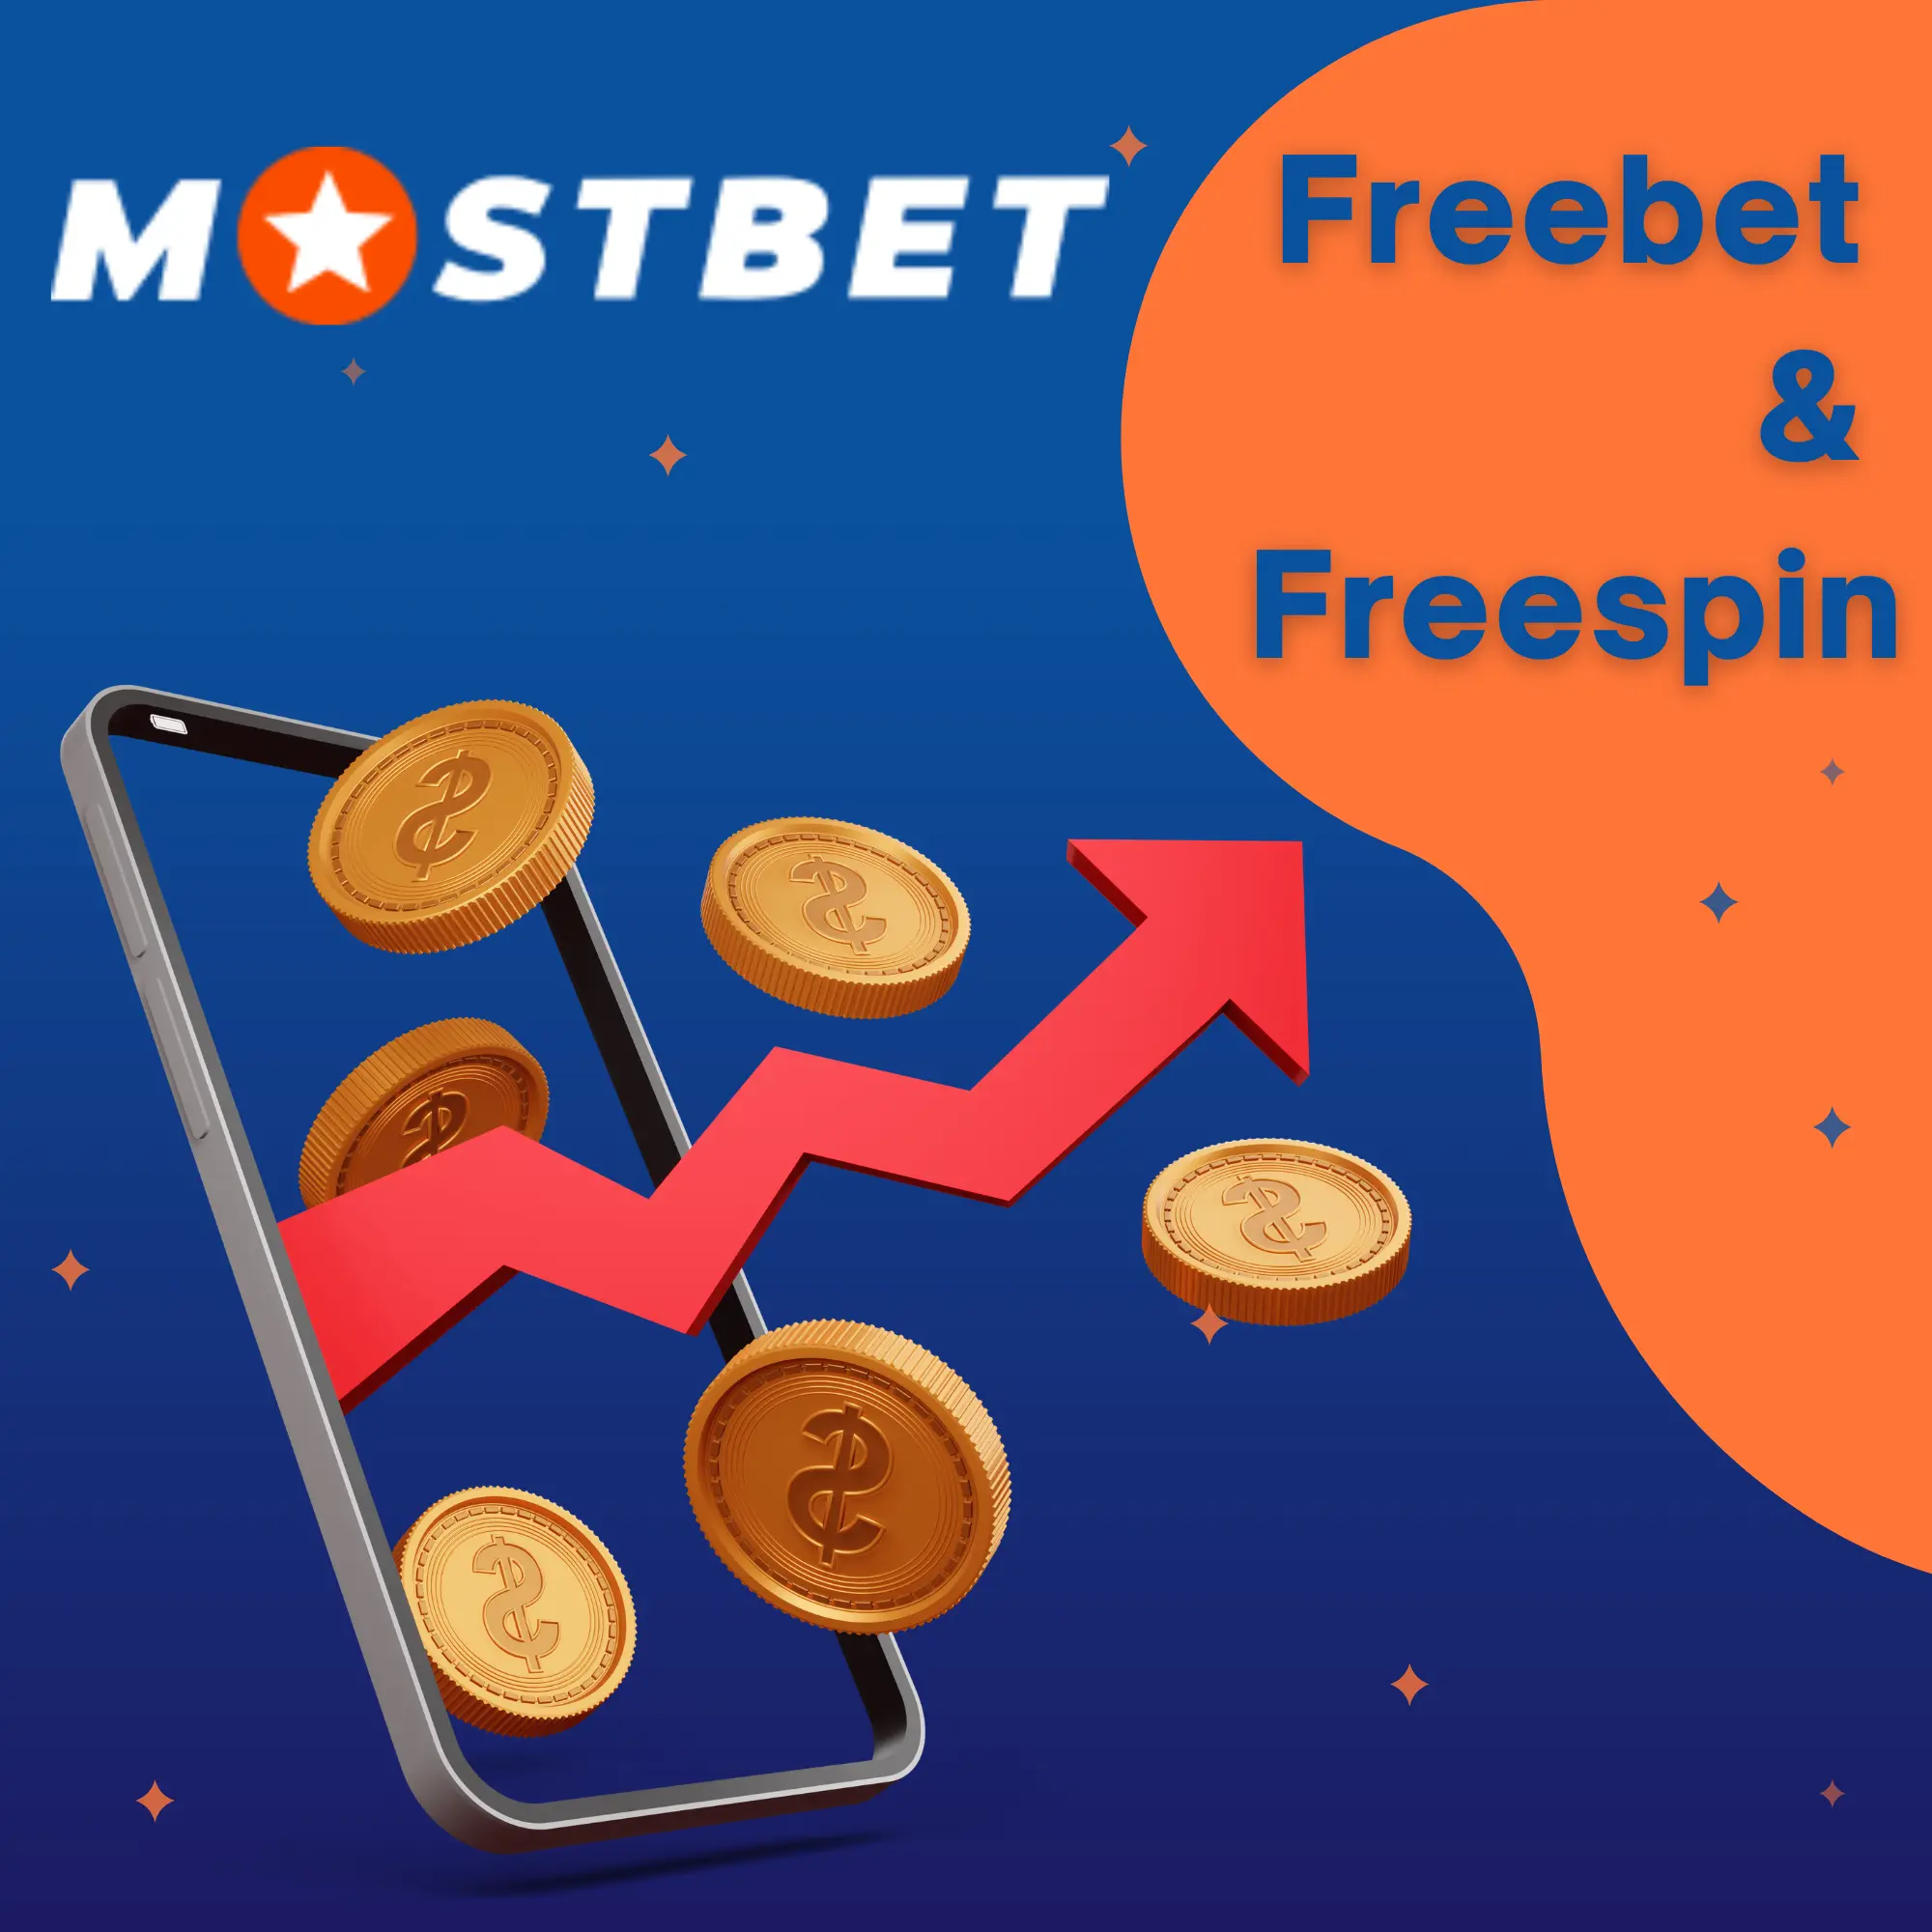 Now You Can Have Your Mostbet betting company and casino in Egypt Done Safely